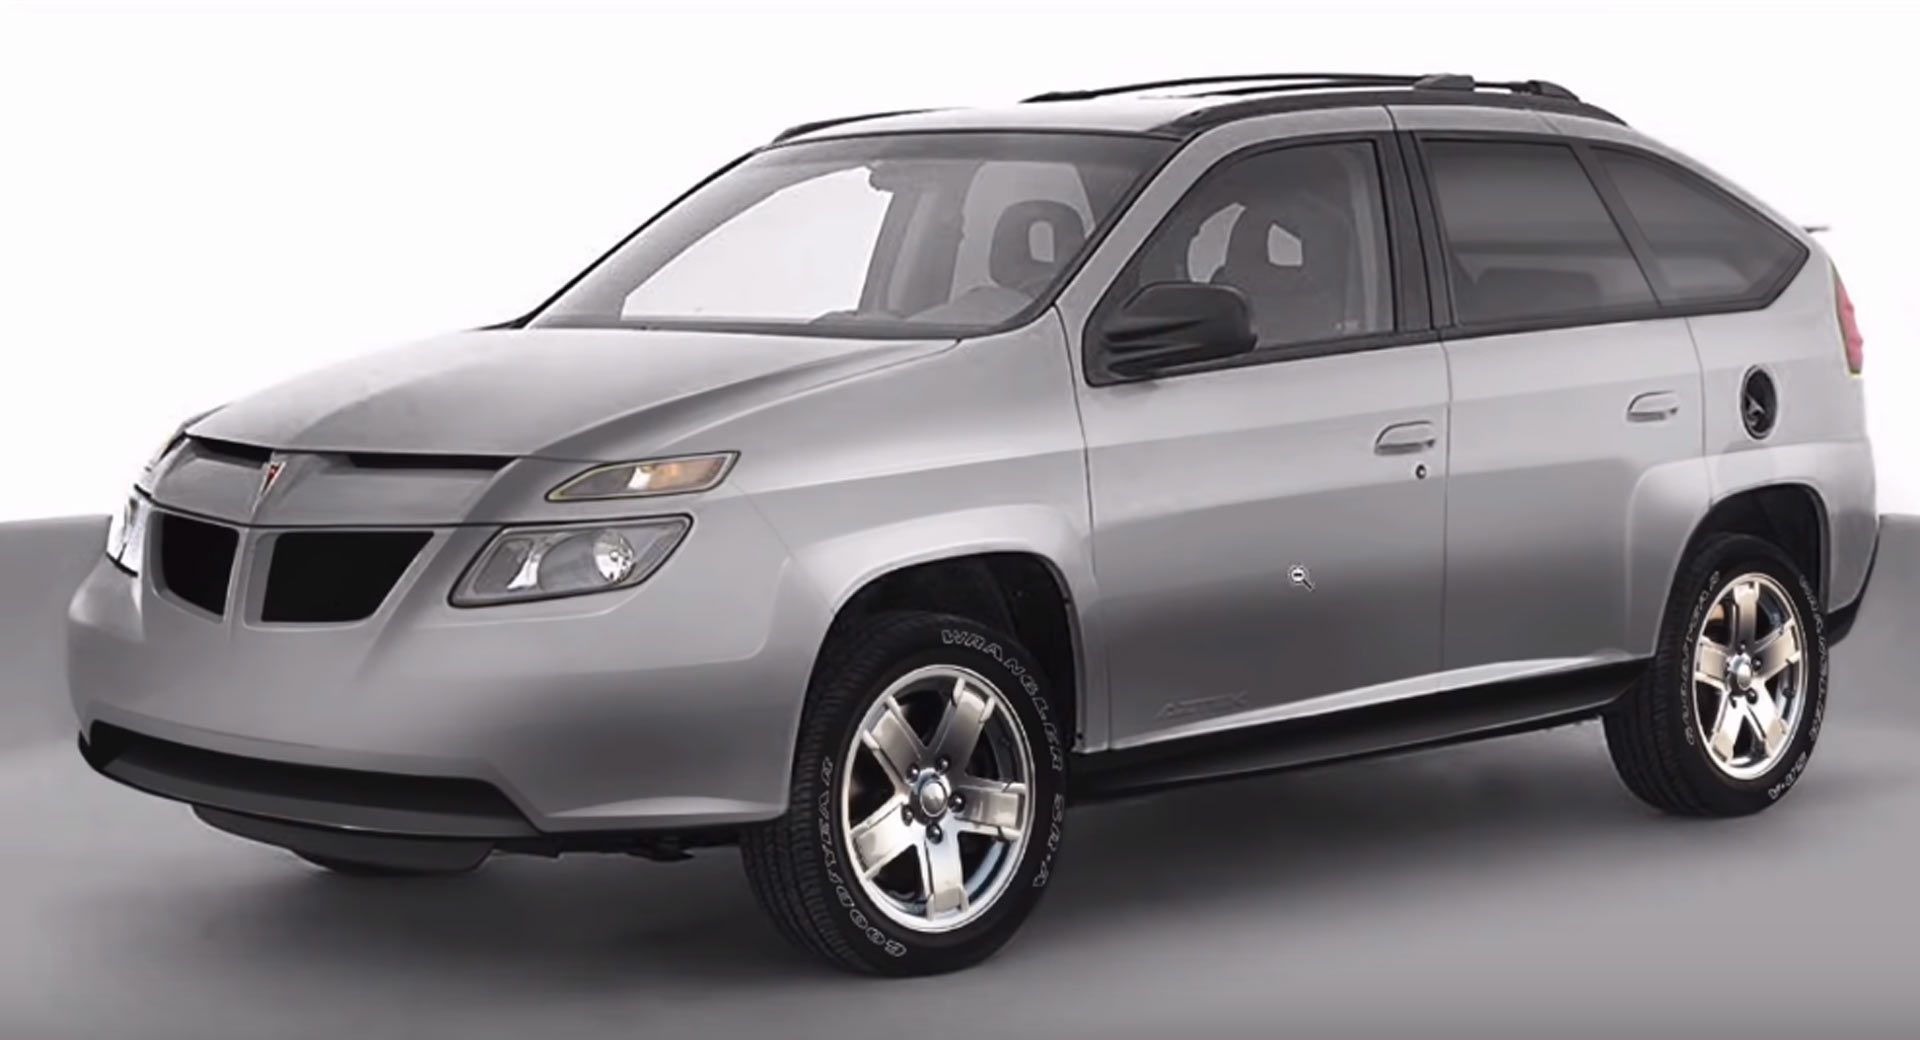 Small Changes Make Pontiac Aztek Look Nicer. Just Kidding – It's Still Ugly  As Sin | Carscoops